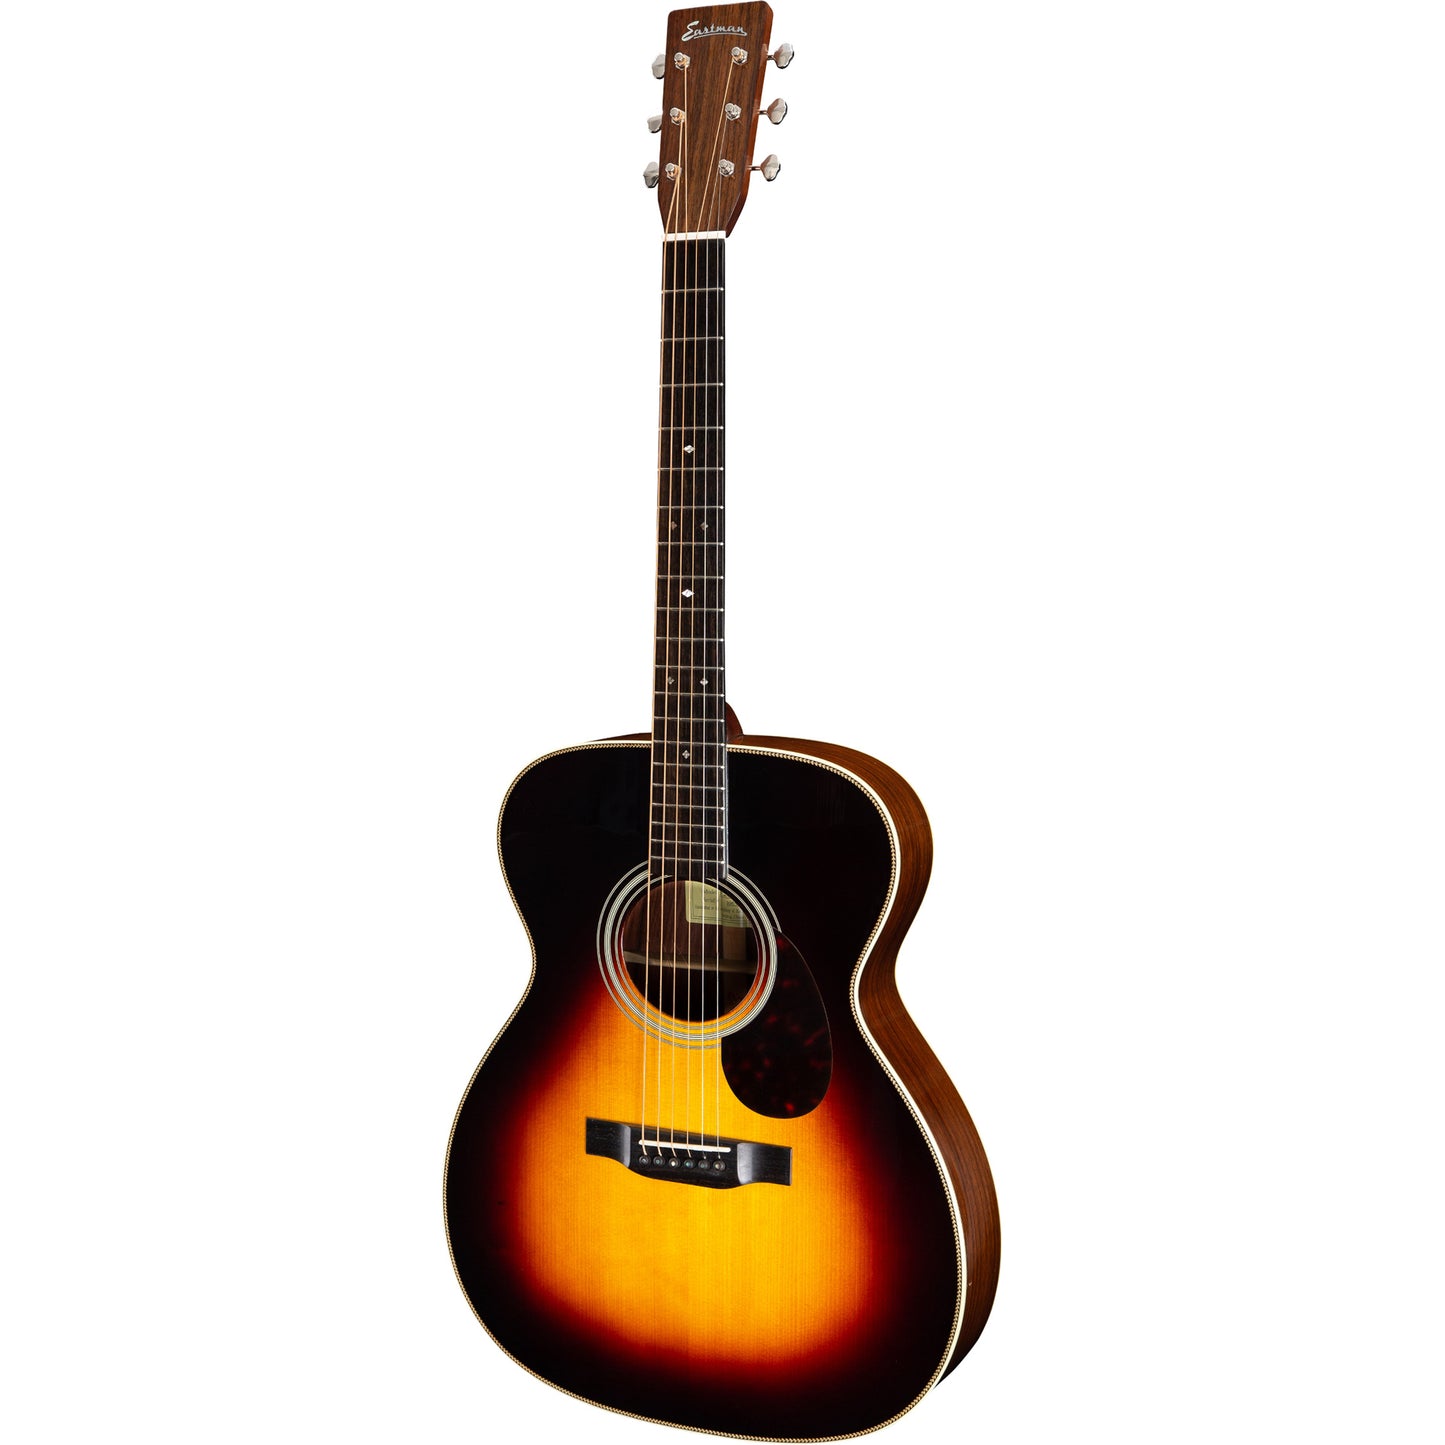 Eastman E20OM Orchestra Model Thermo Cure Acoustic Guitar - Sunburst